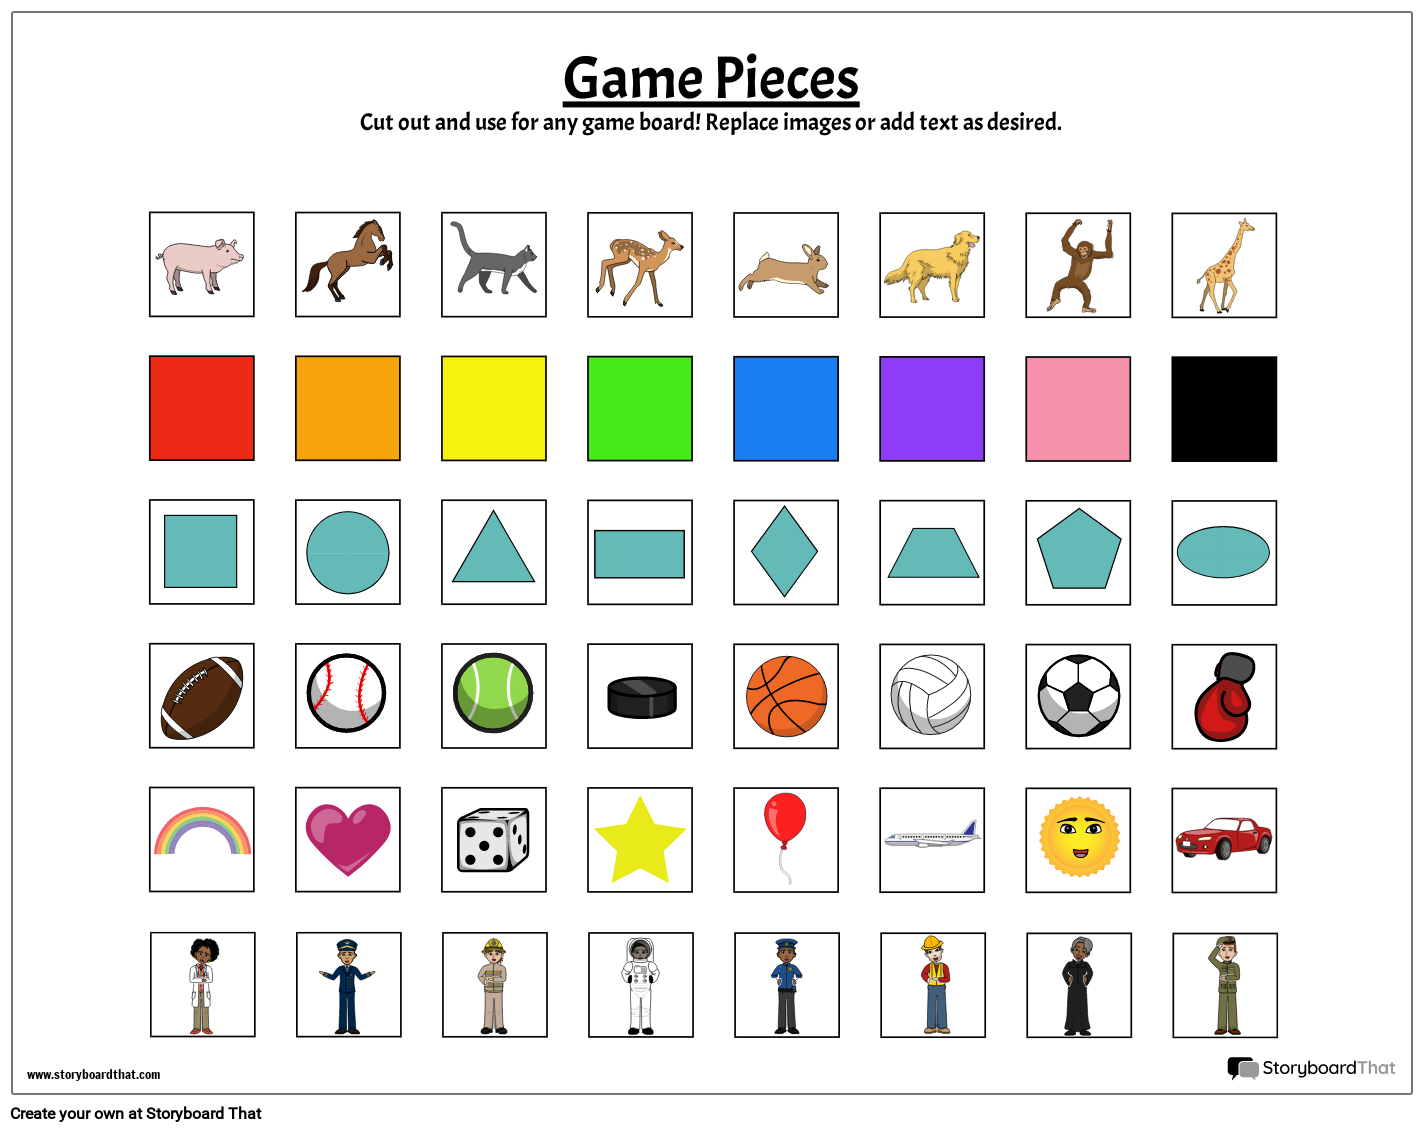 Board Game Pieces - Names, Examples and Uses